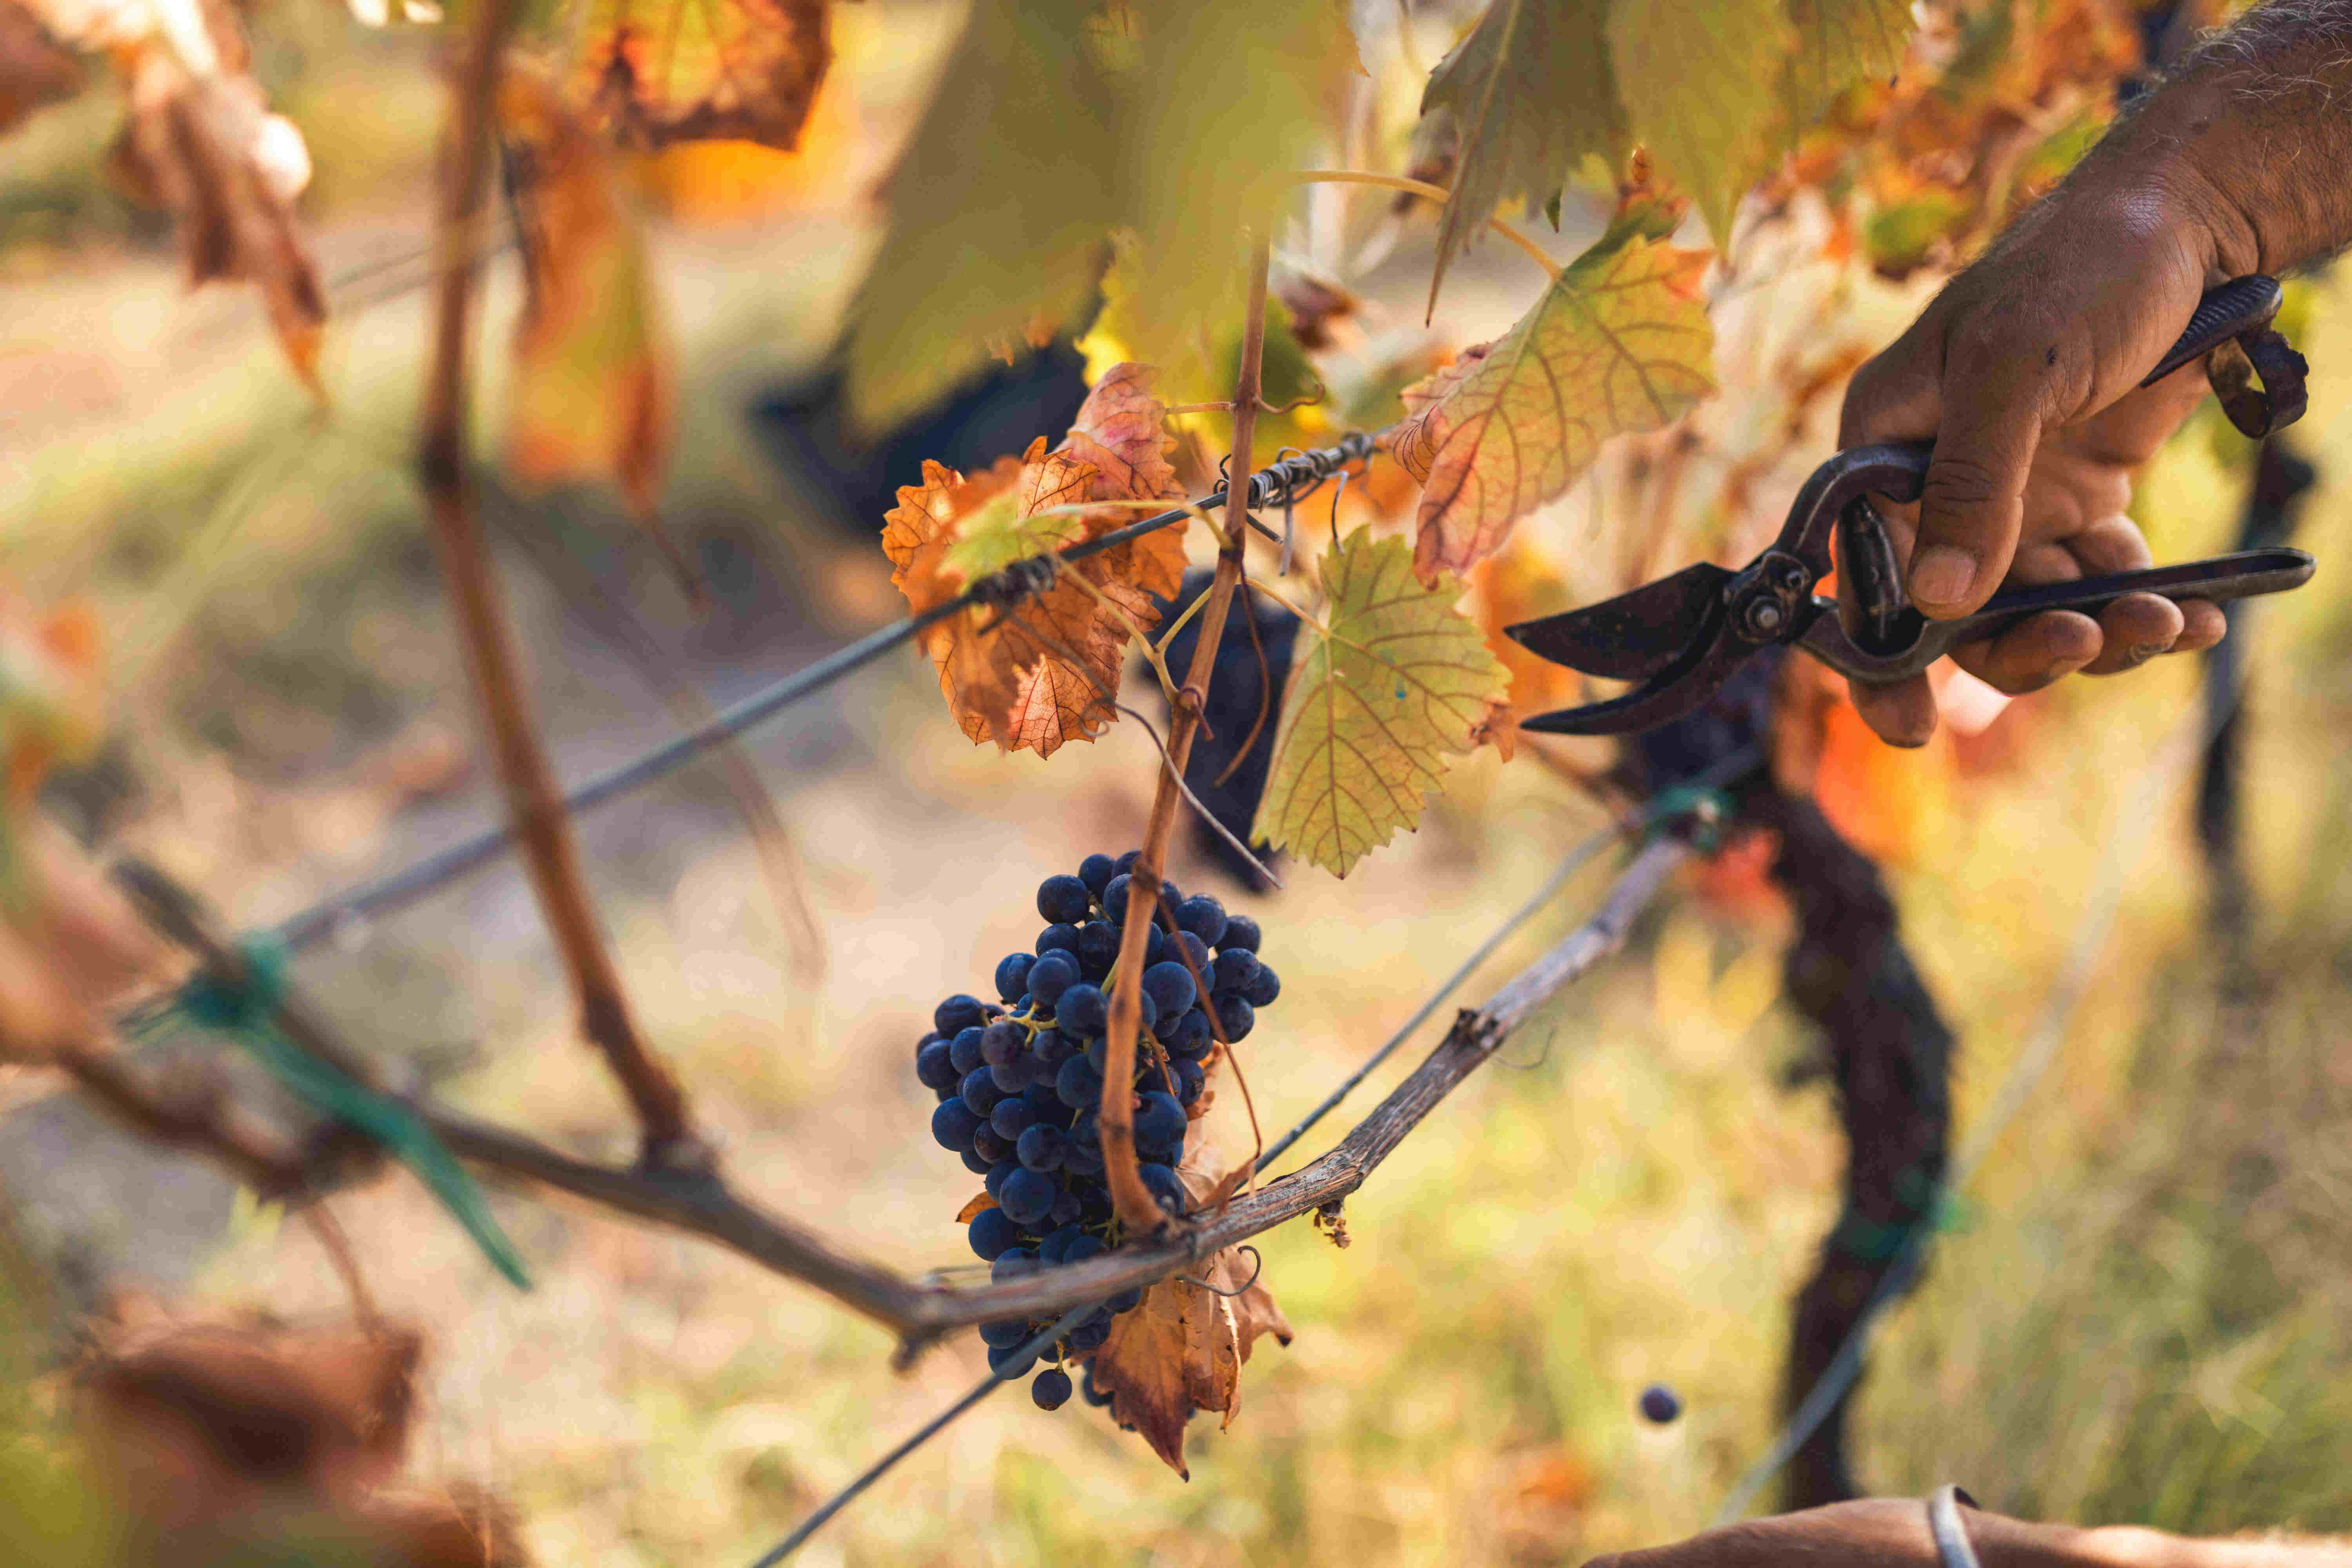 Pick the perfect bushel of photos when you choose these great red grapes in a vineyard